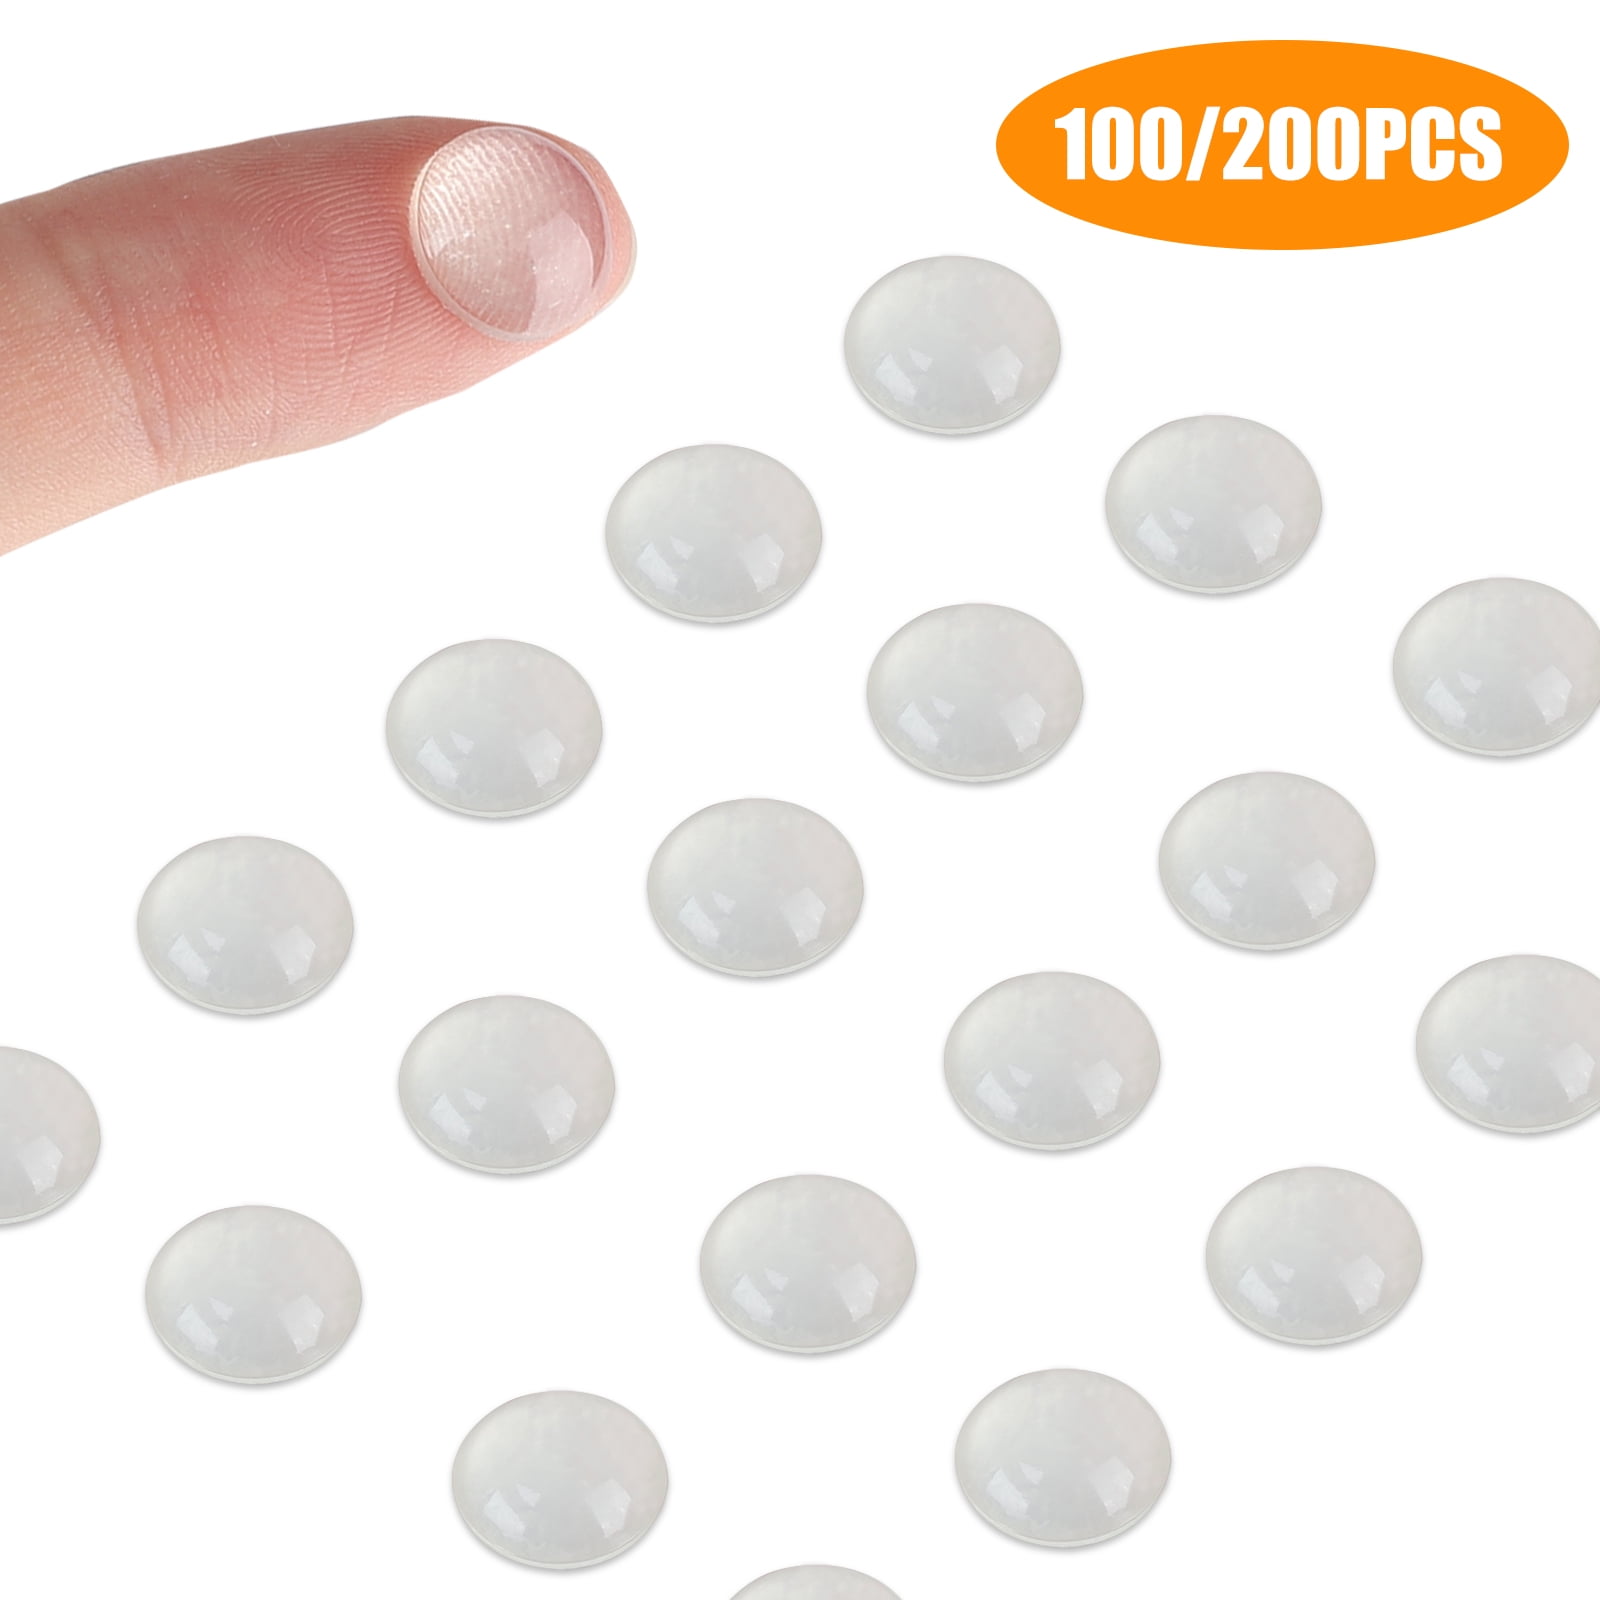 100PCS Bumper Pads Clear Self-Adhesive Rubber Cabinet Door Drawer Bumpers Pads 